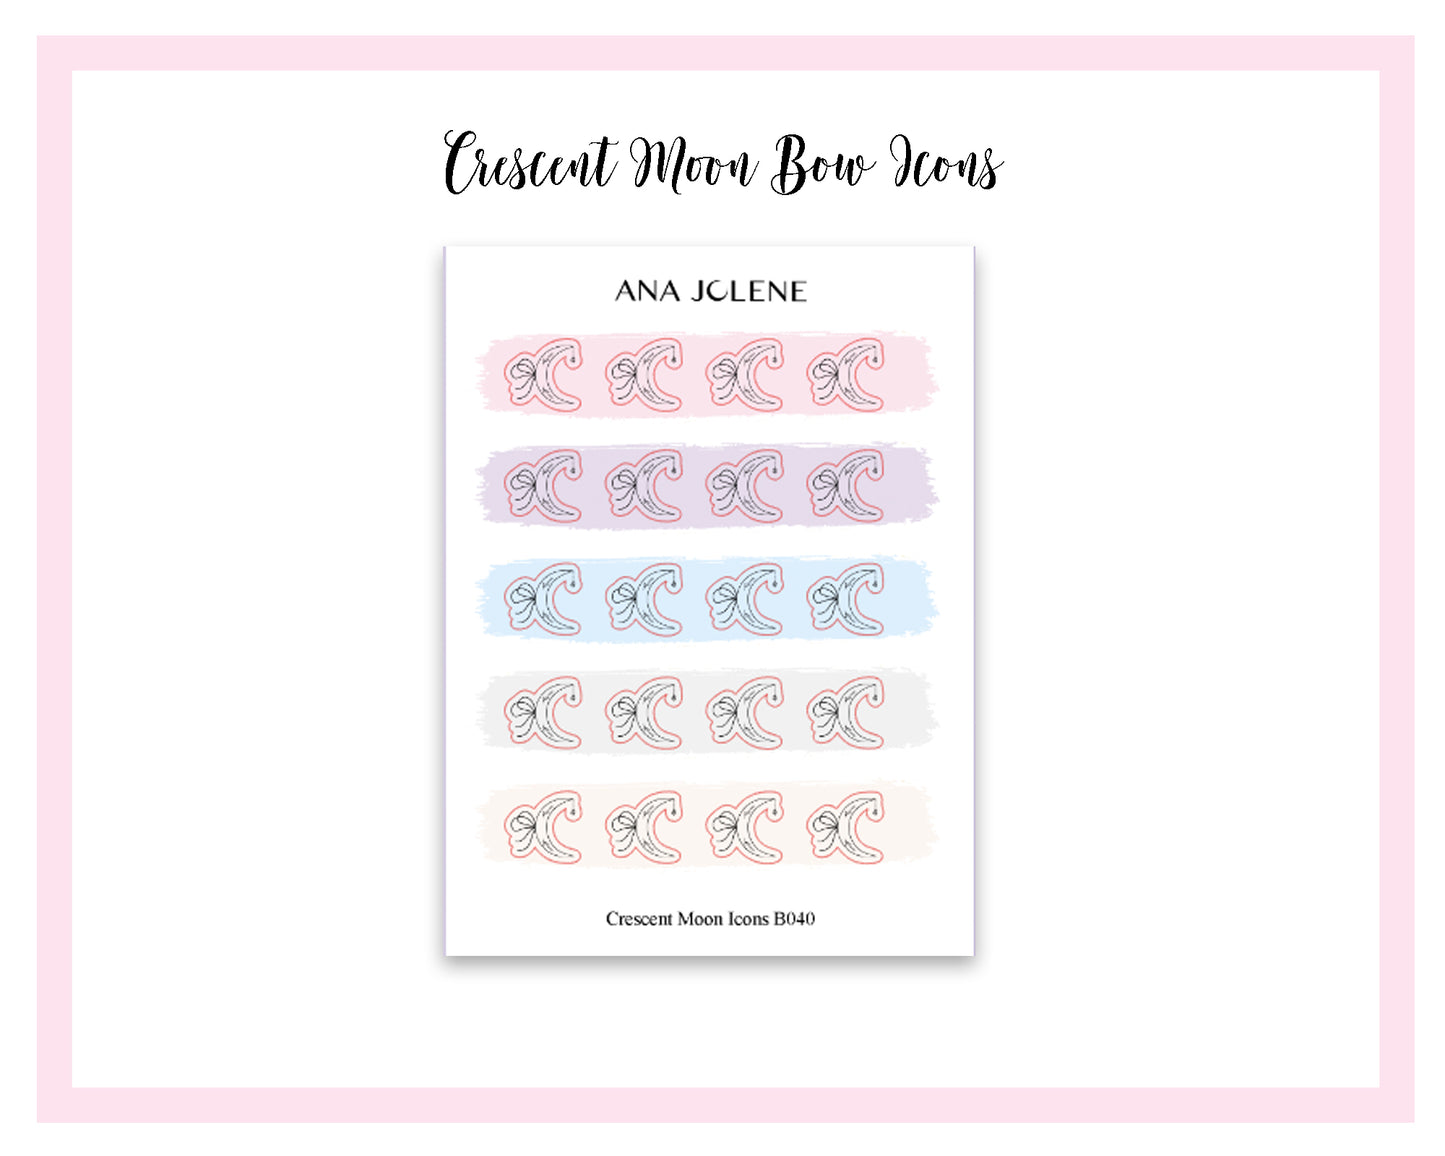 Crescent Moon Bow Icon Stickers